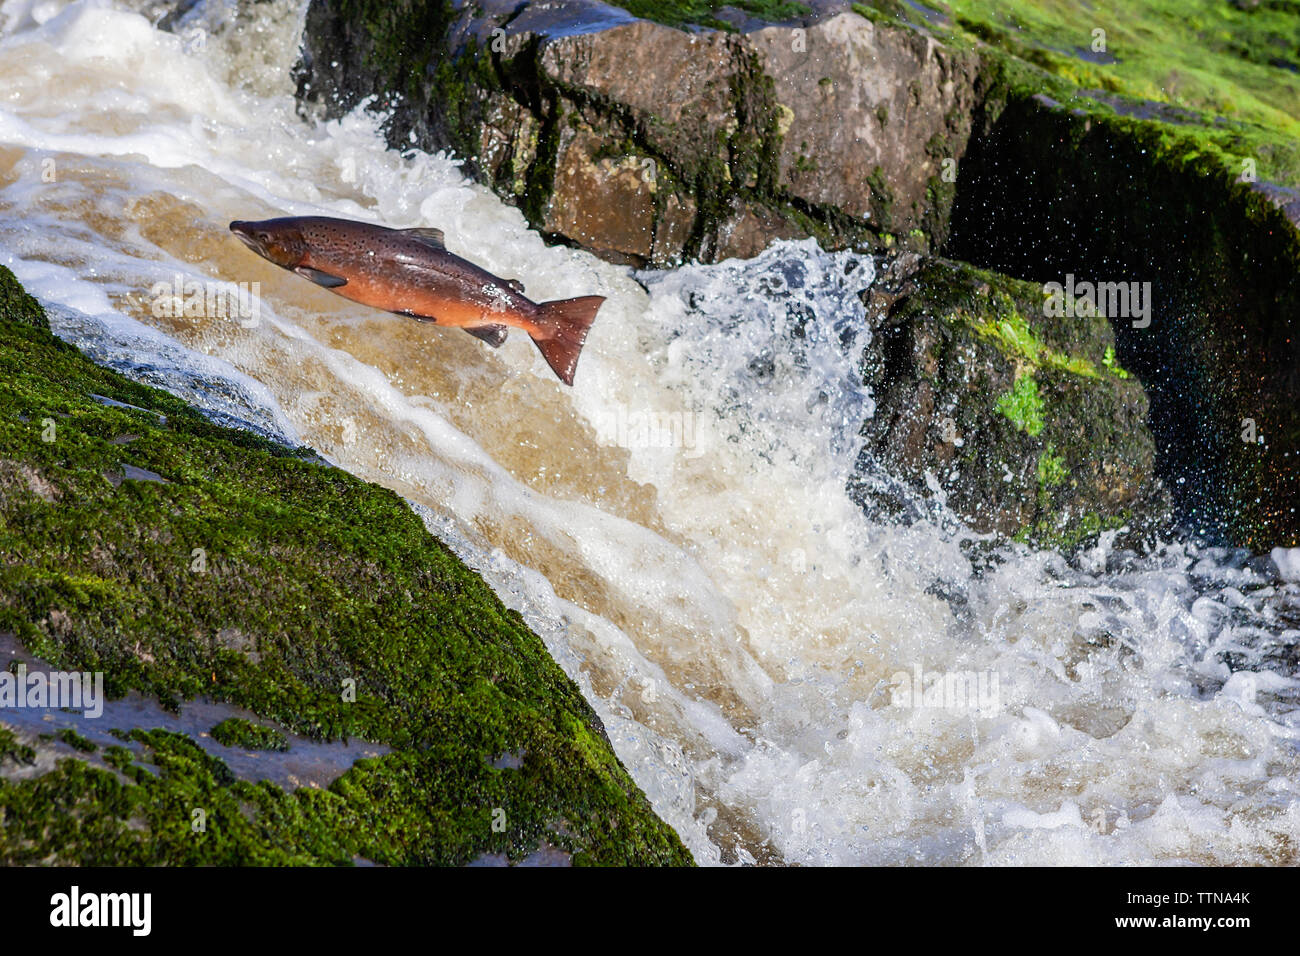 Atlantic Salmon, (Salmo salar),  leaping up a waterfall on the way to its breeding ground in the river it was born in. Stock Photo